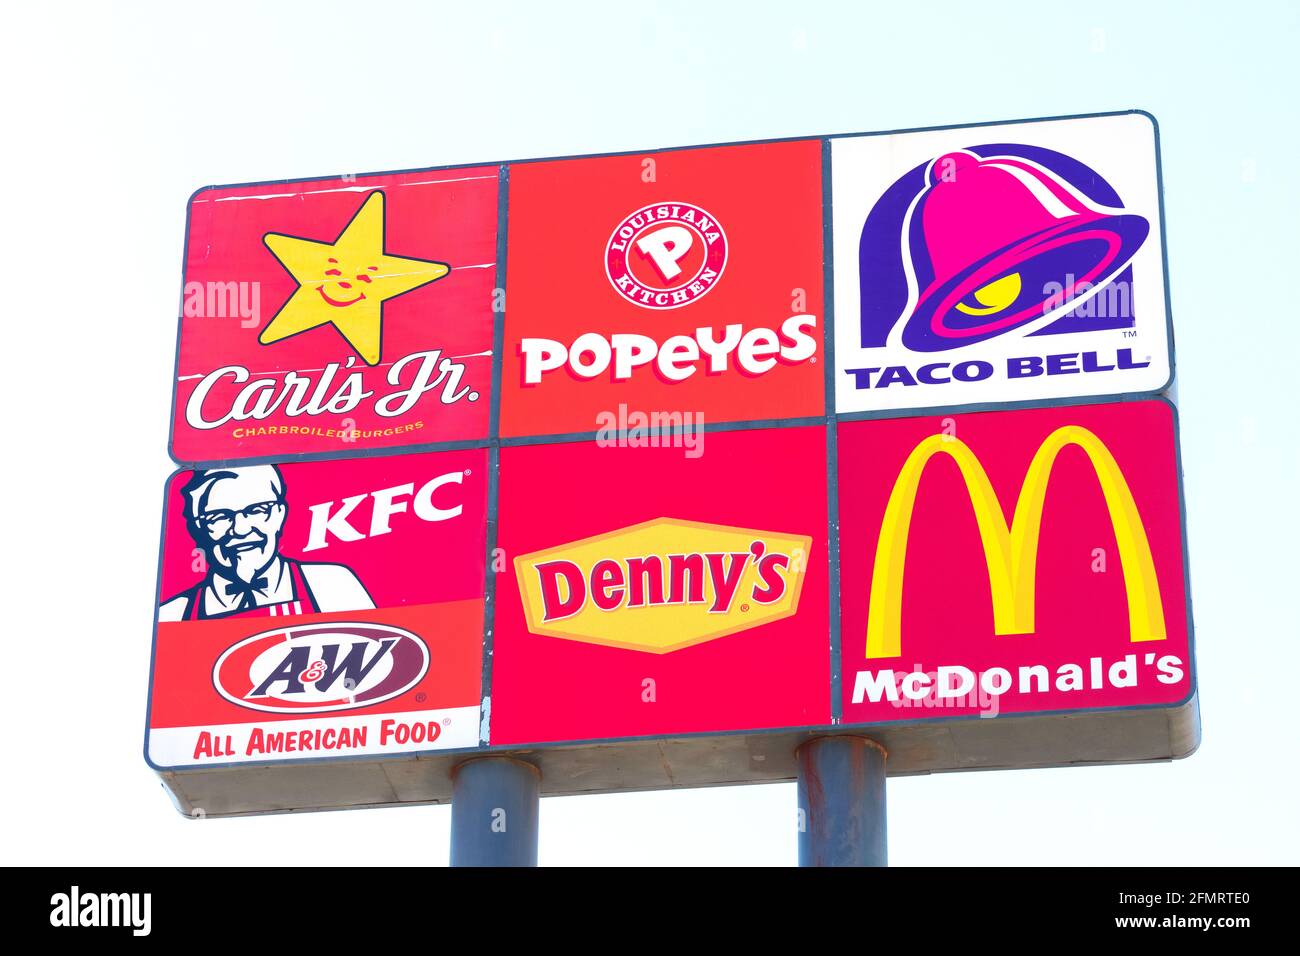 Carl's Jr., Popeyes, Taco Bell, KFC, Denny s and McDonald's fast food restaurants logos on road sign. Interstate highway advertising sign. - Stockton, Stock Photo